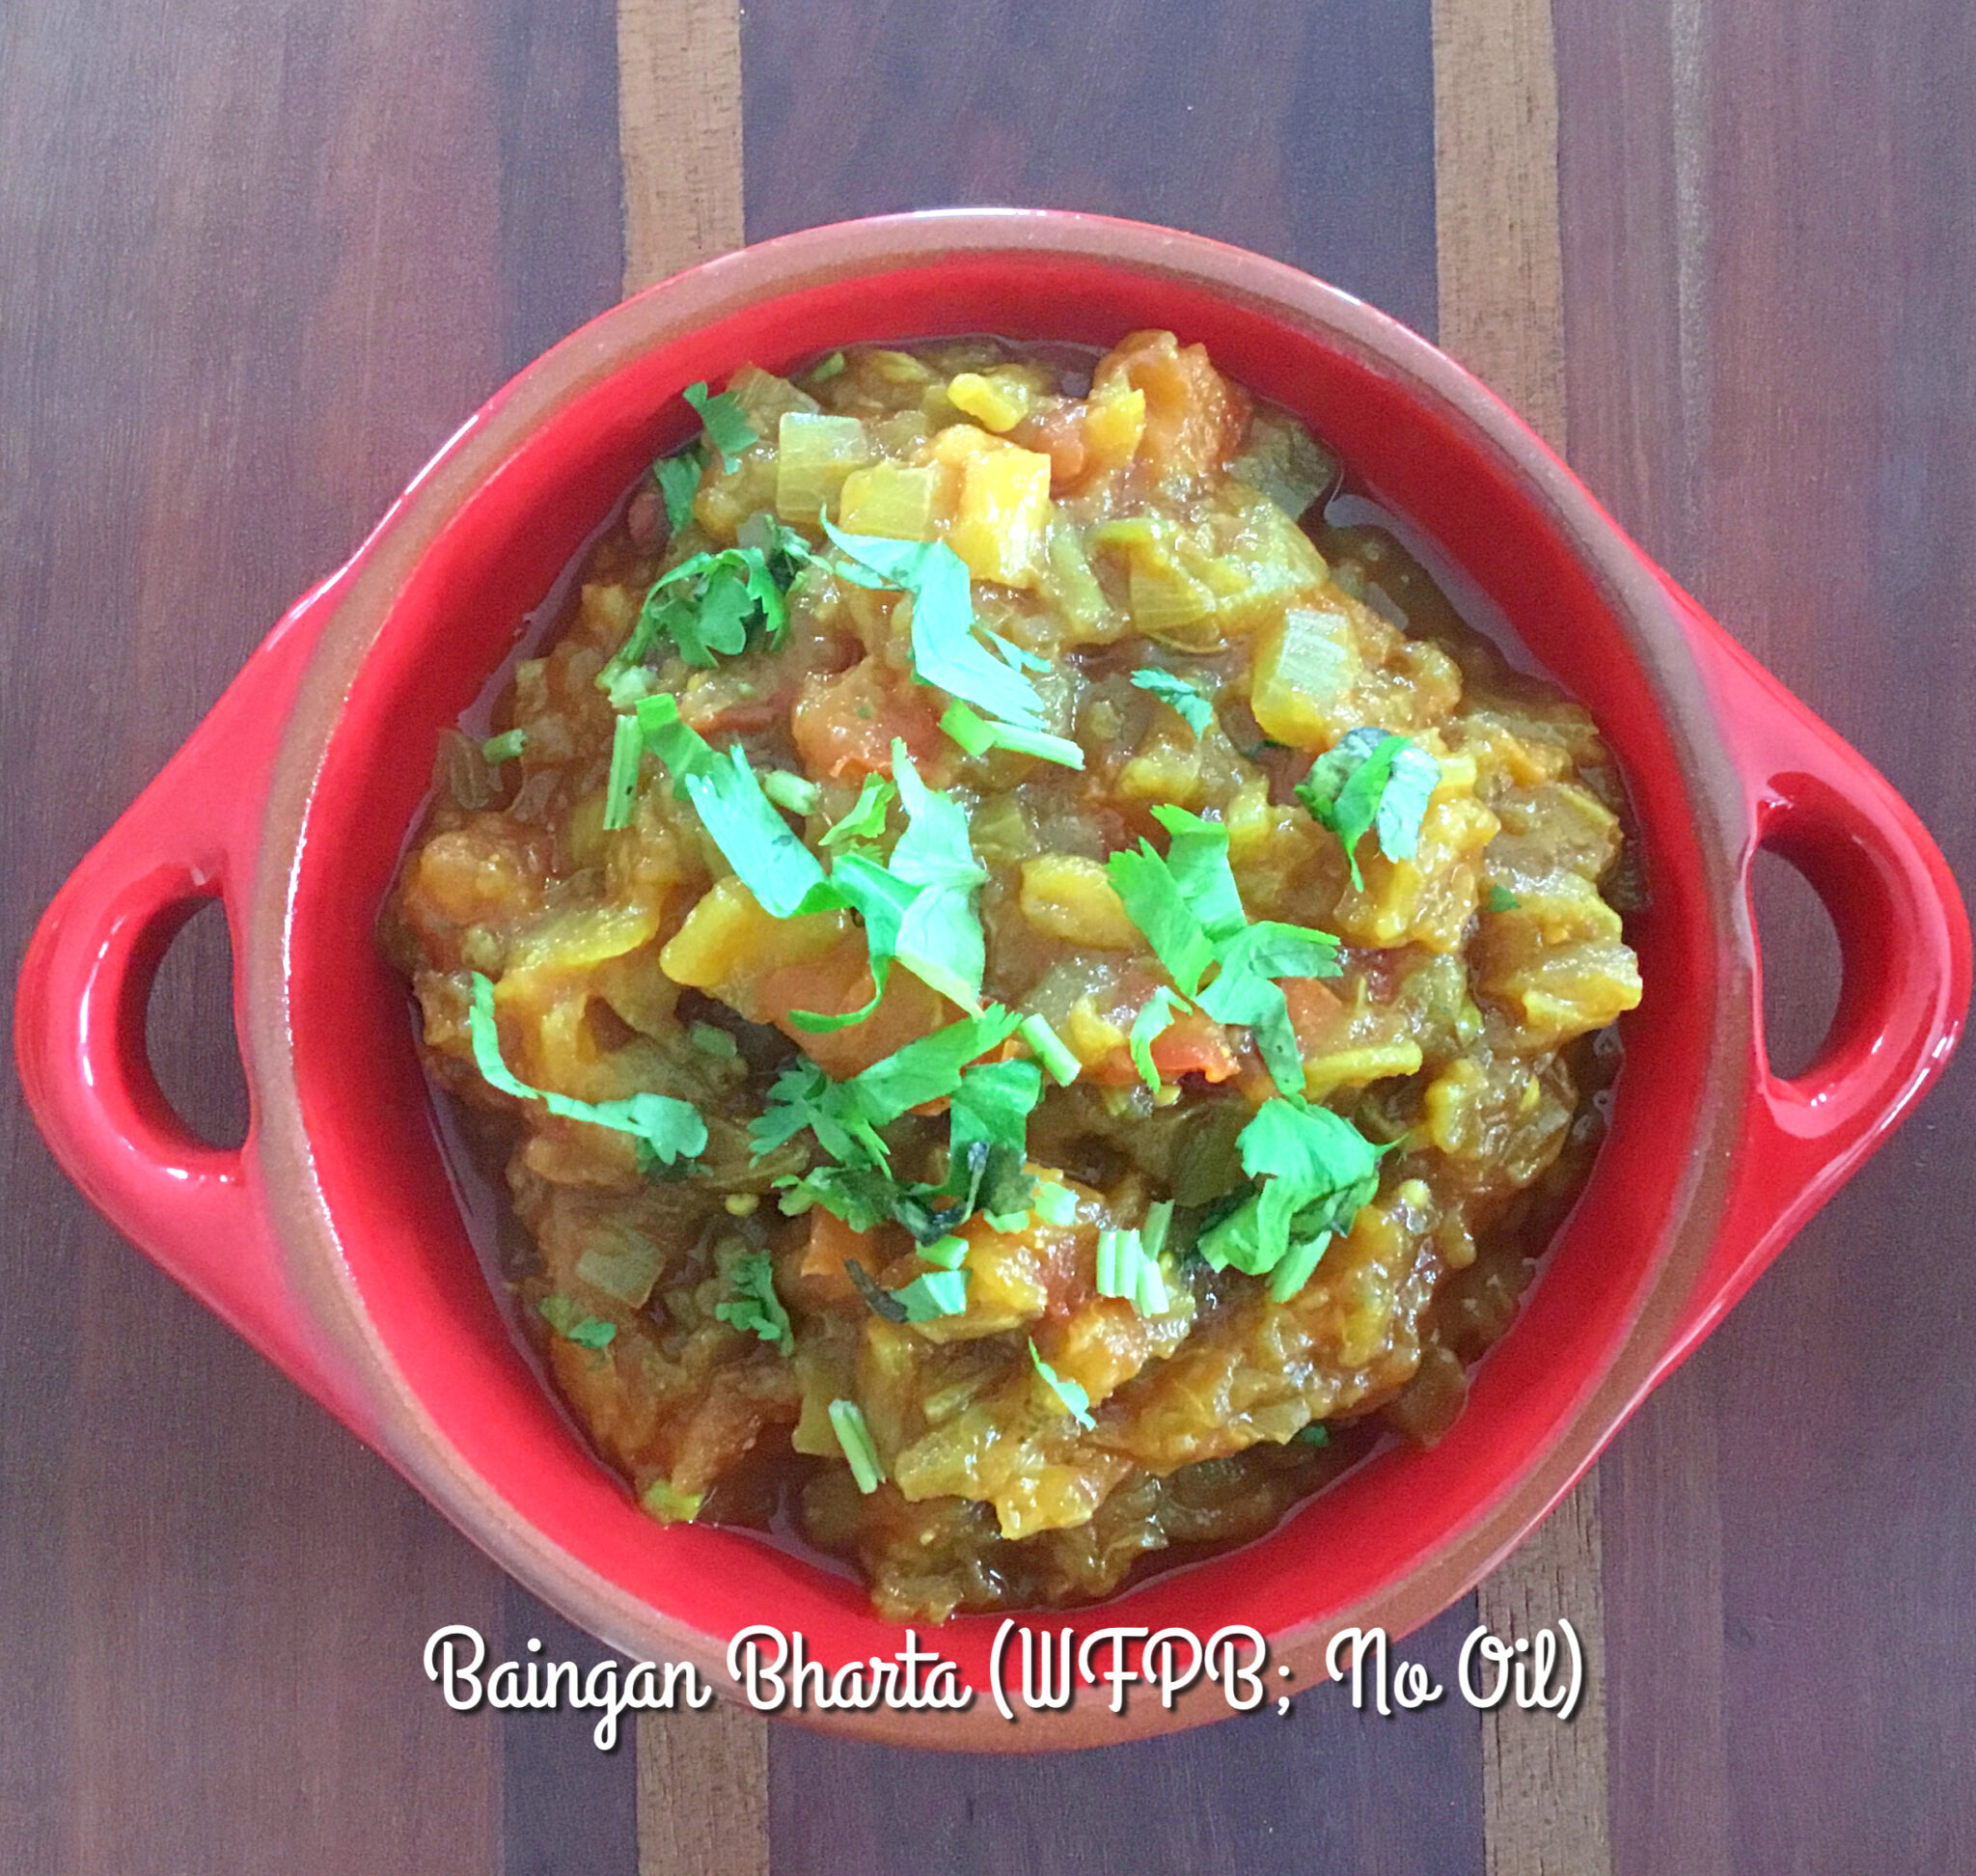 Baingan Bharta WFPB is a Spiced Eggplant Mash in a red serving dish, garnished with green coriander